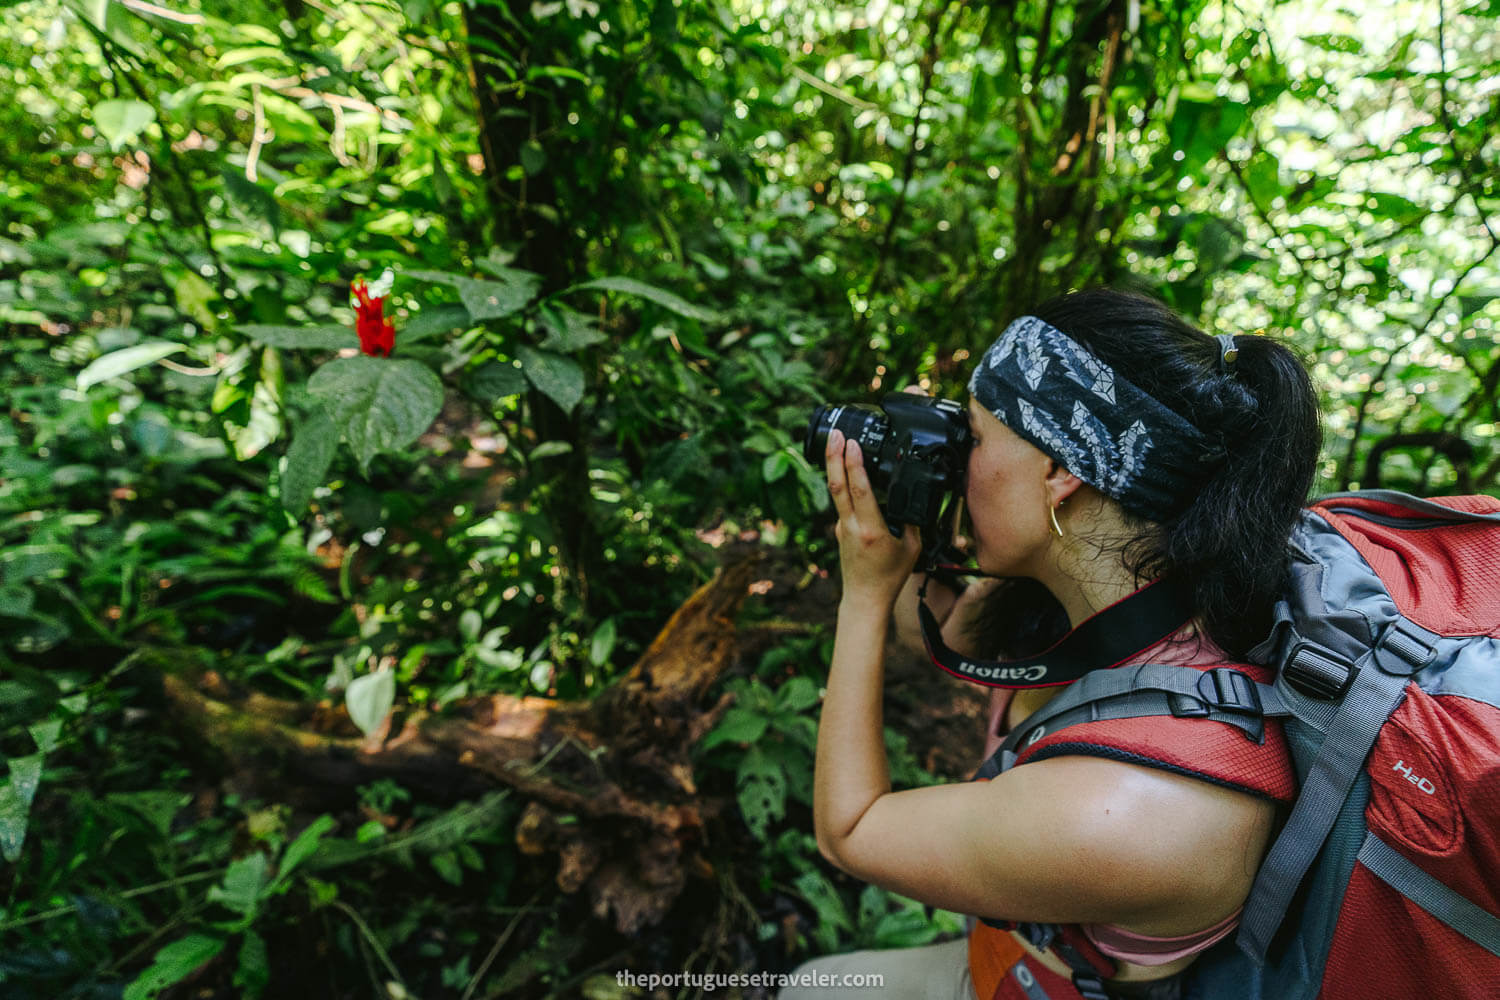 Jhos photographing some of the flora in the jungle